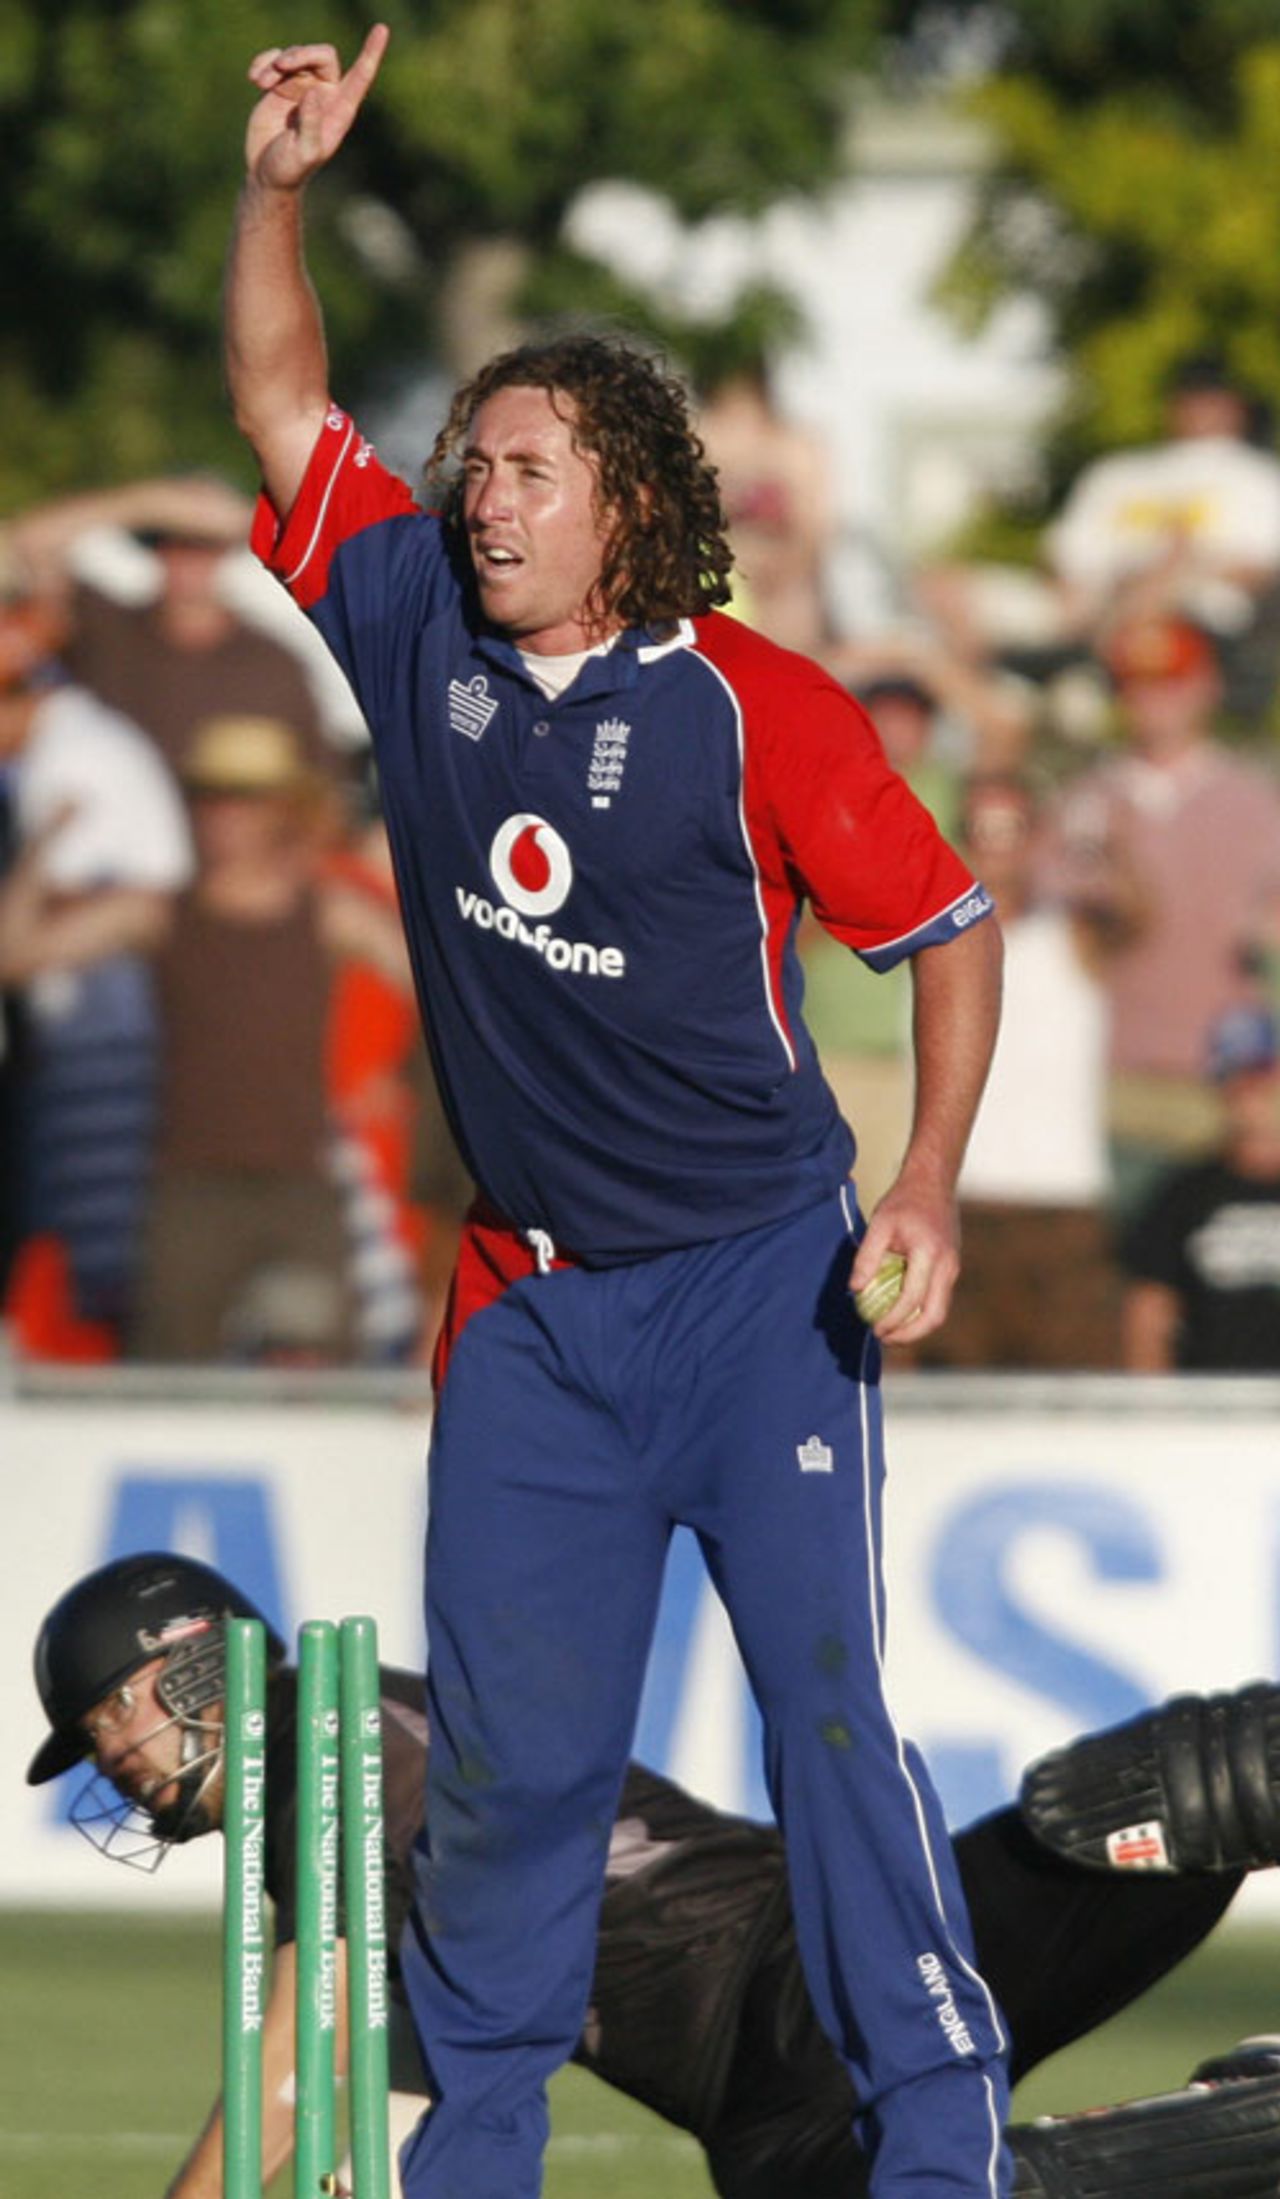 Ryan Sidebottom appeals unsuccessfully for the run-out of Daniel Vettori, New Zealand v England, 4th ODI, Napier, February 20, 2008